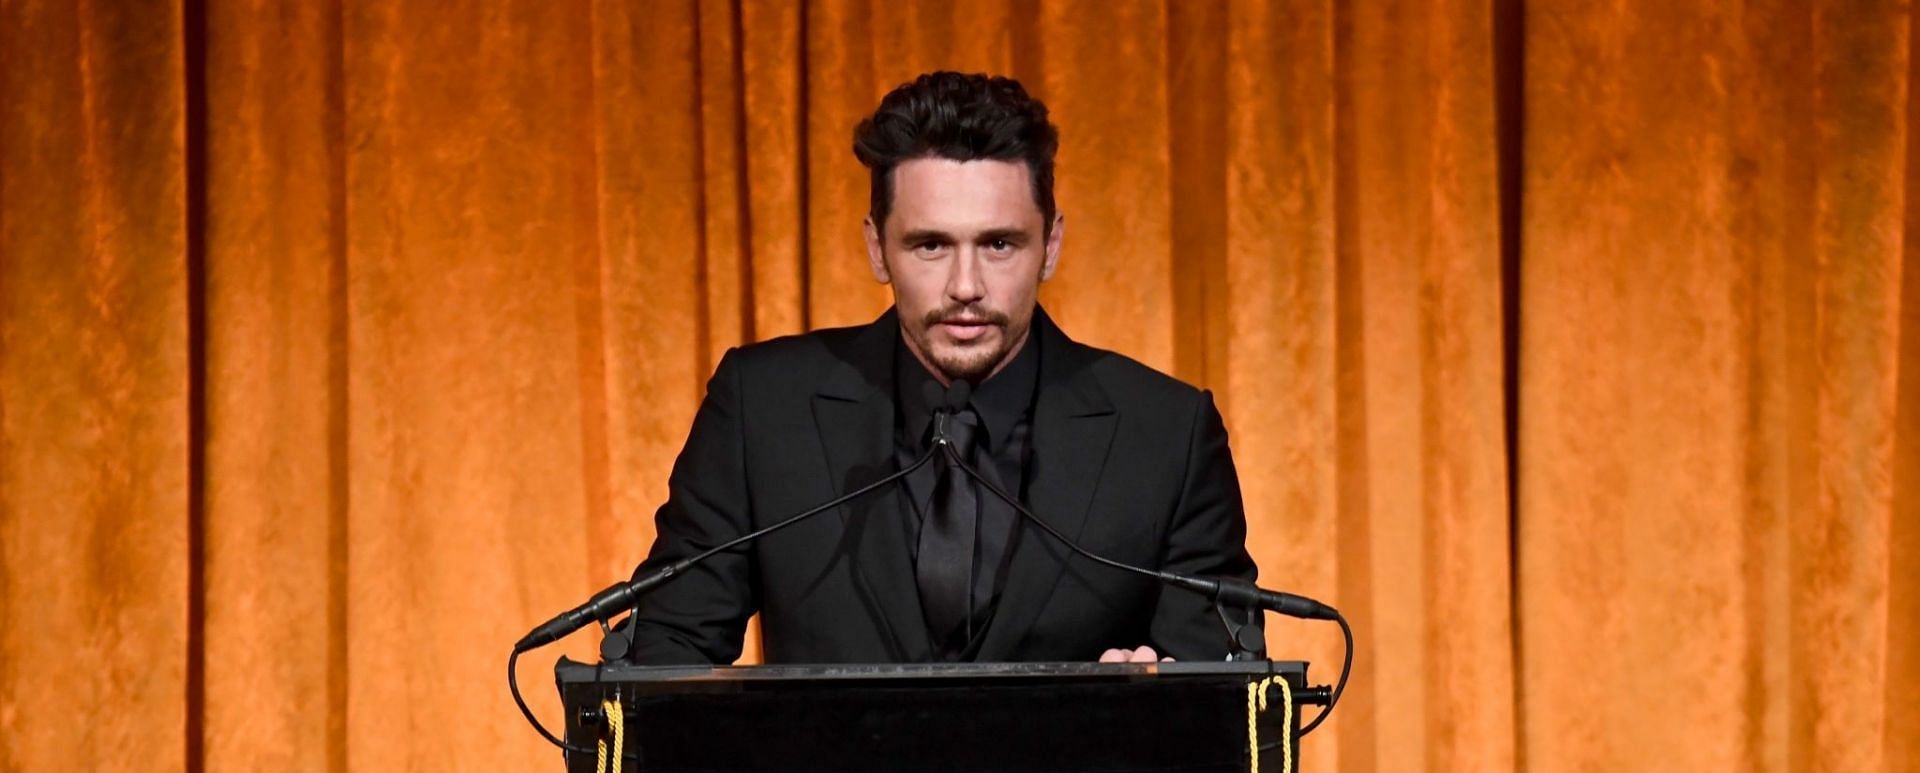 James Franco revealed he struggled with alcoholism and other questionable addictions (Image via Dimitrios Kambouris/Getty Images)